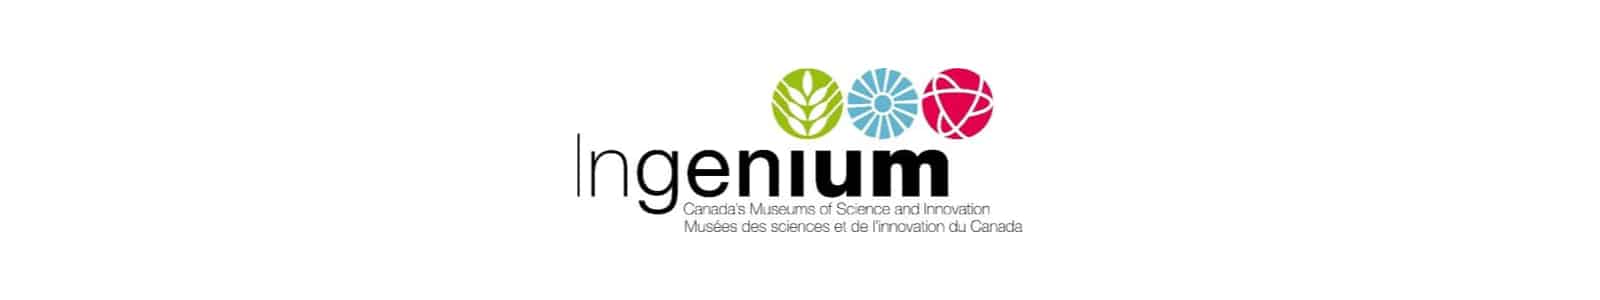 Ingenium – Canada’s Museums of Science and Innovation